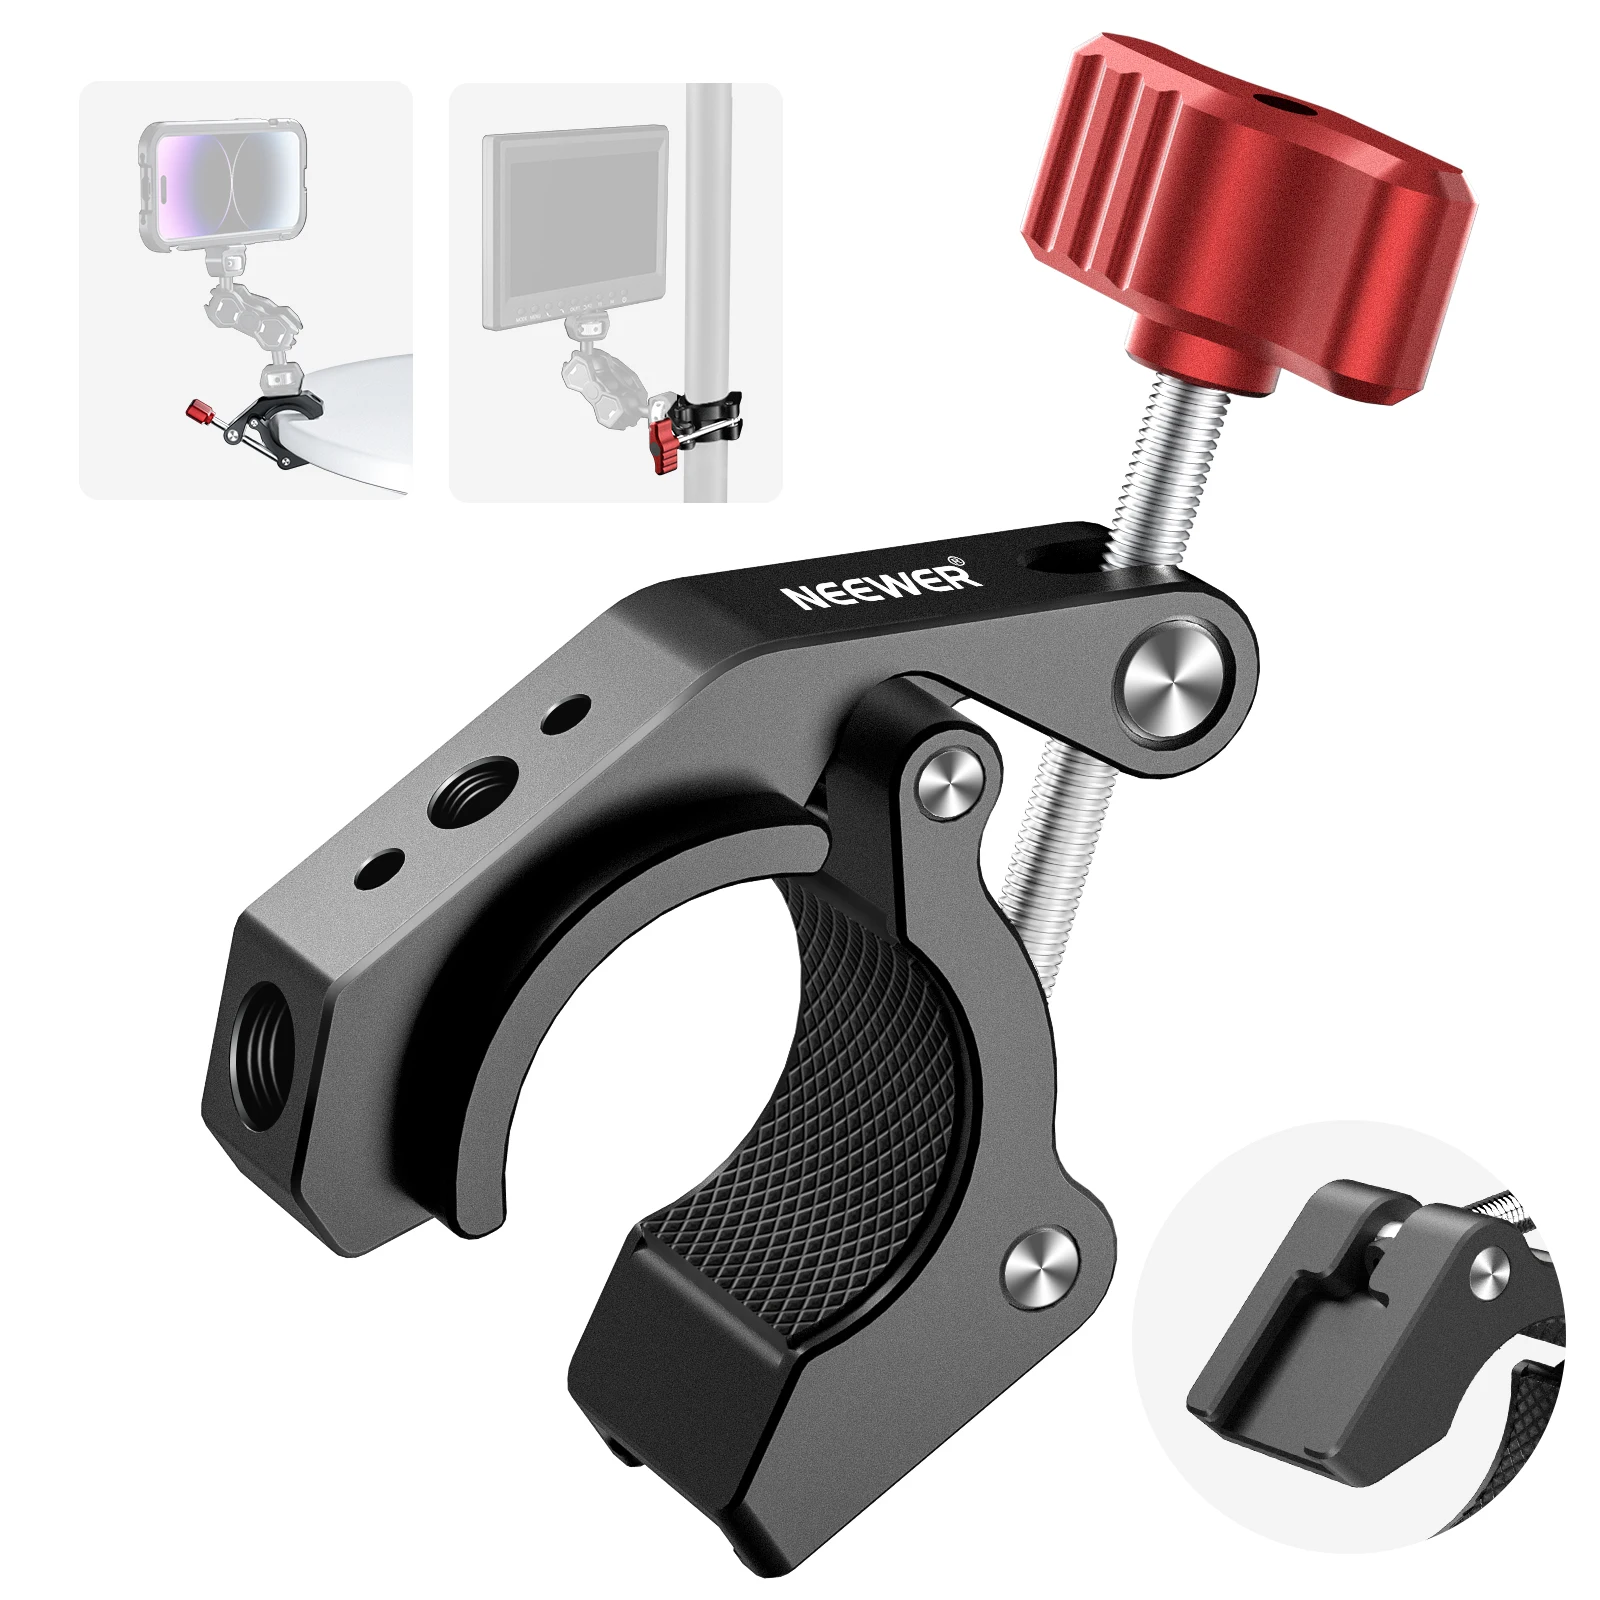 

NEEWER Super Clamp with Cold Shoe and 1/4" 3/8" Threaded Holes, Max Load 4.4lb/2kg, Crab Shaped Camera Clamp Mount